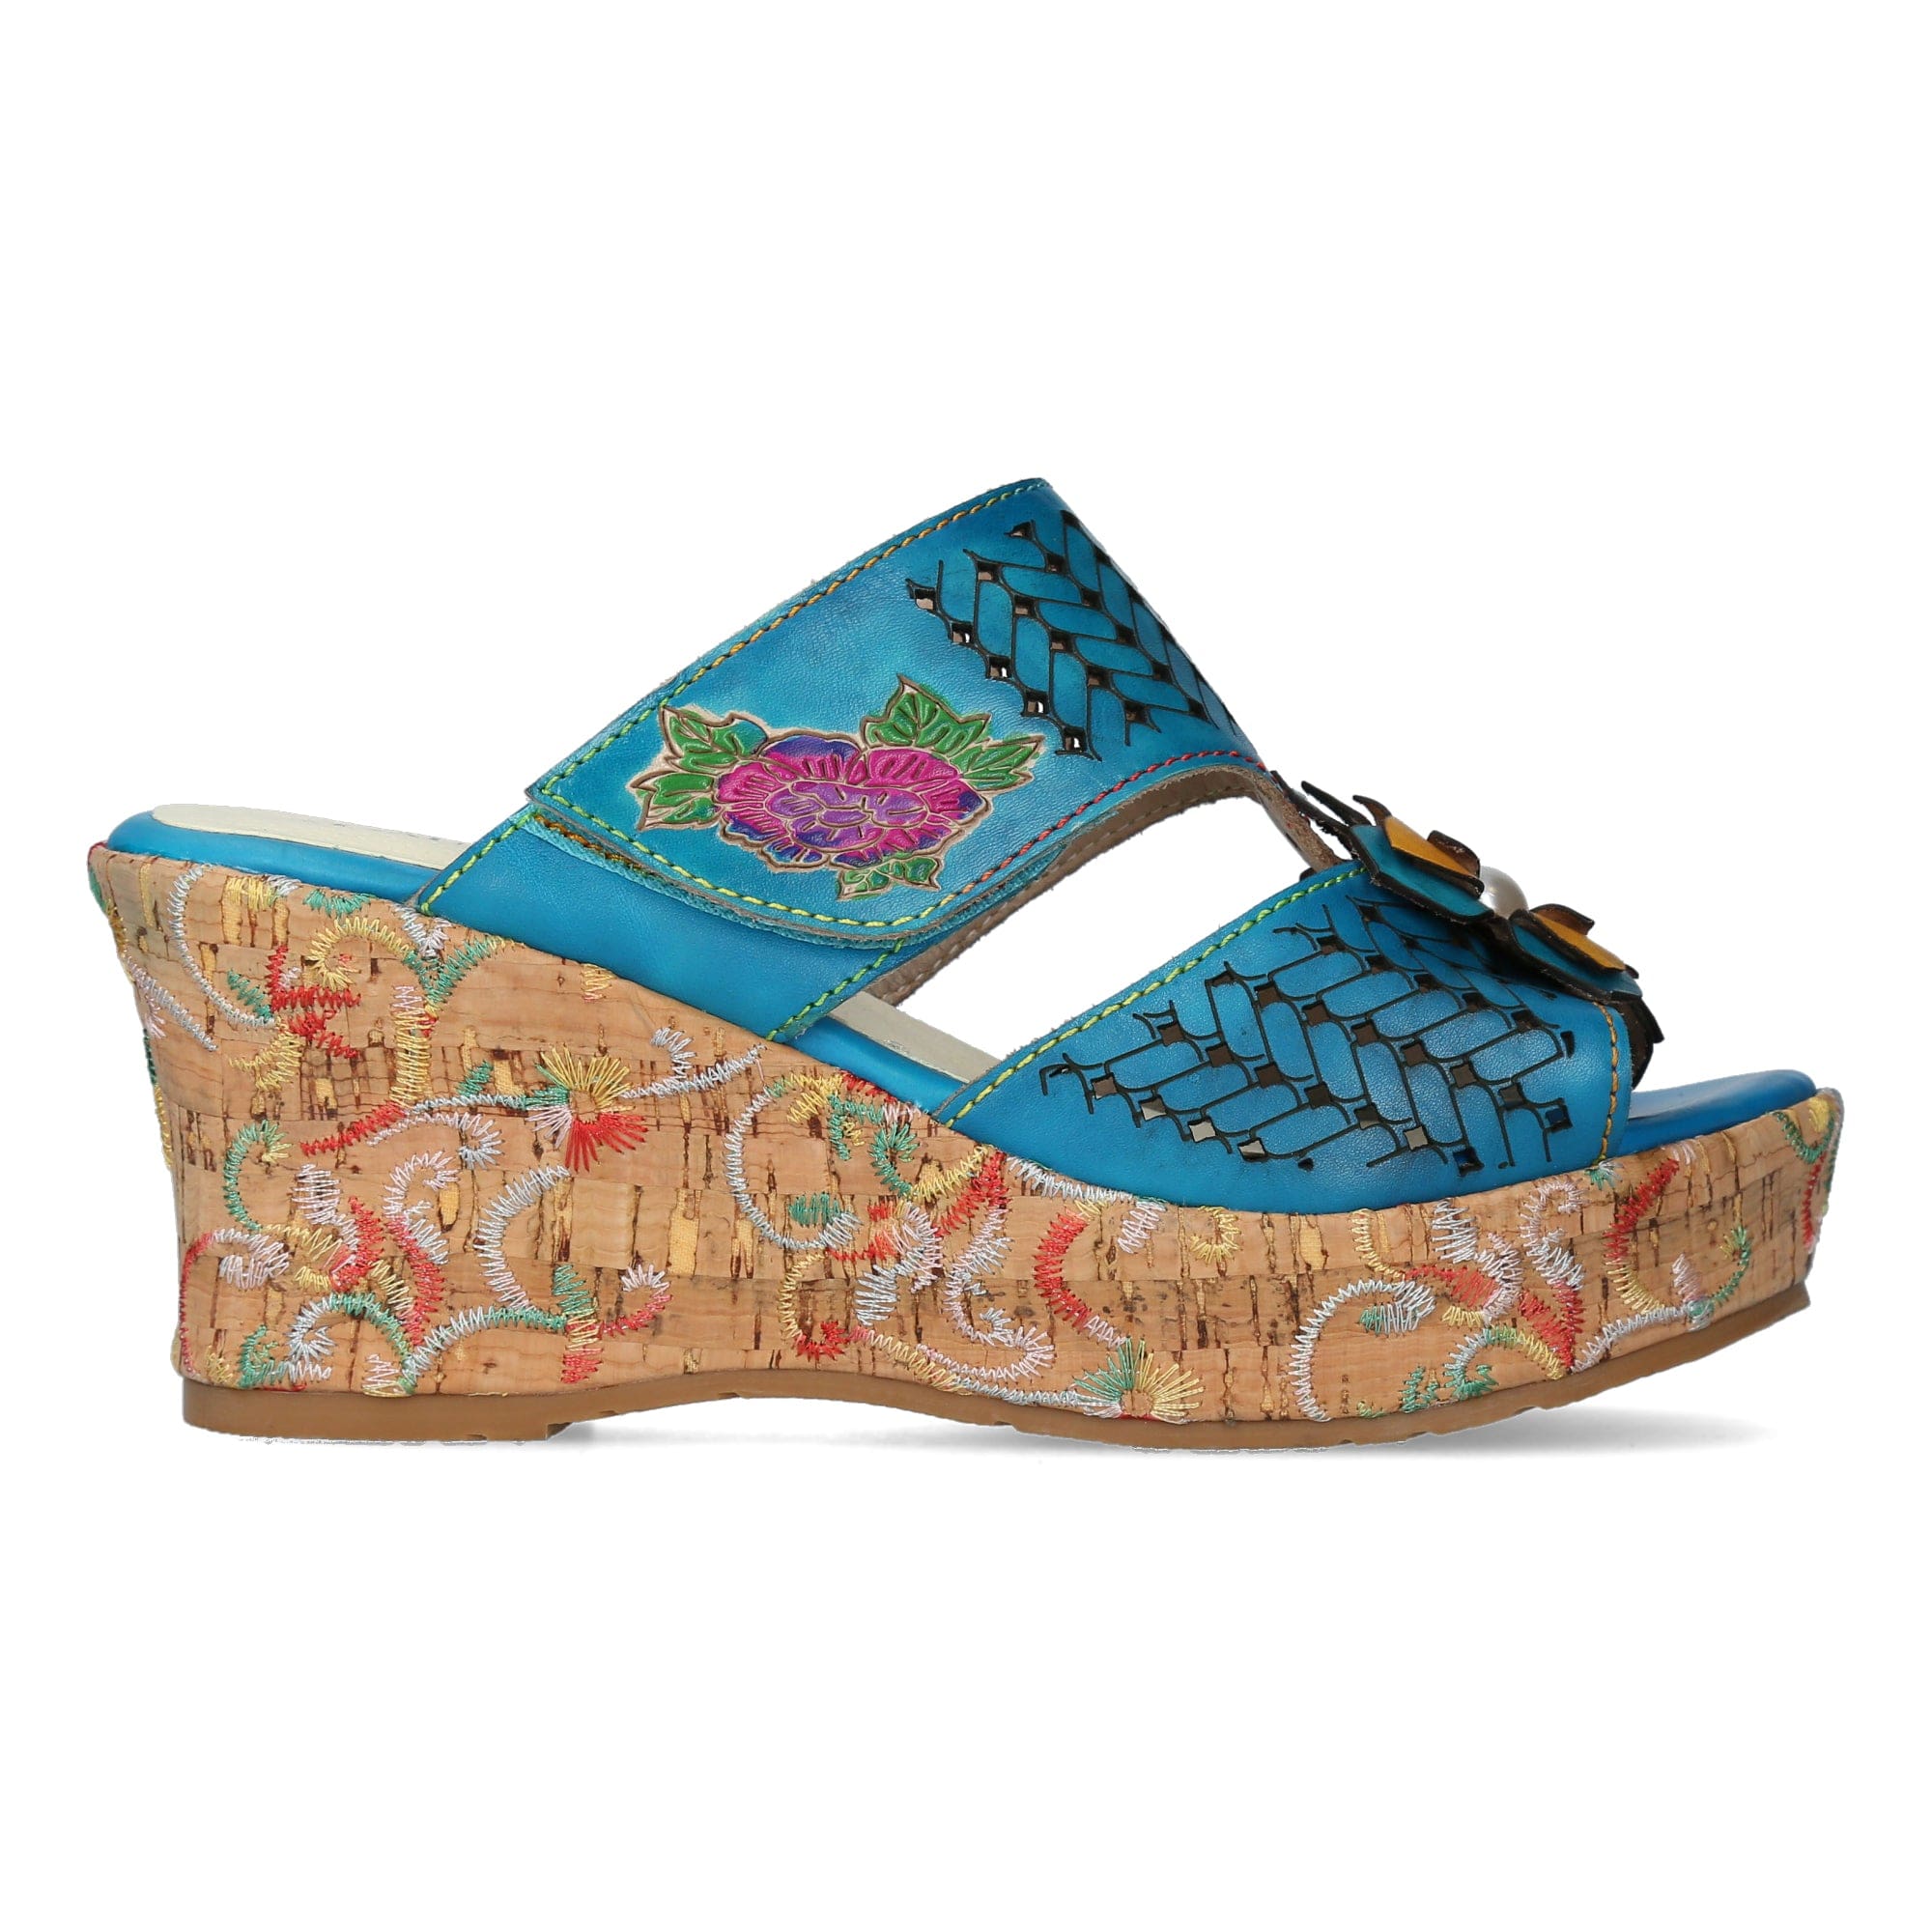 Chaussure LORIEO 20 - 35 / Turquoise - Mule